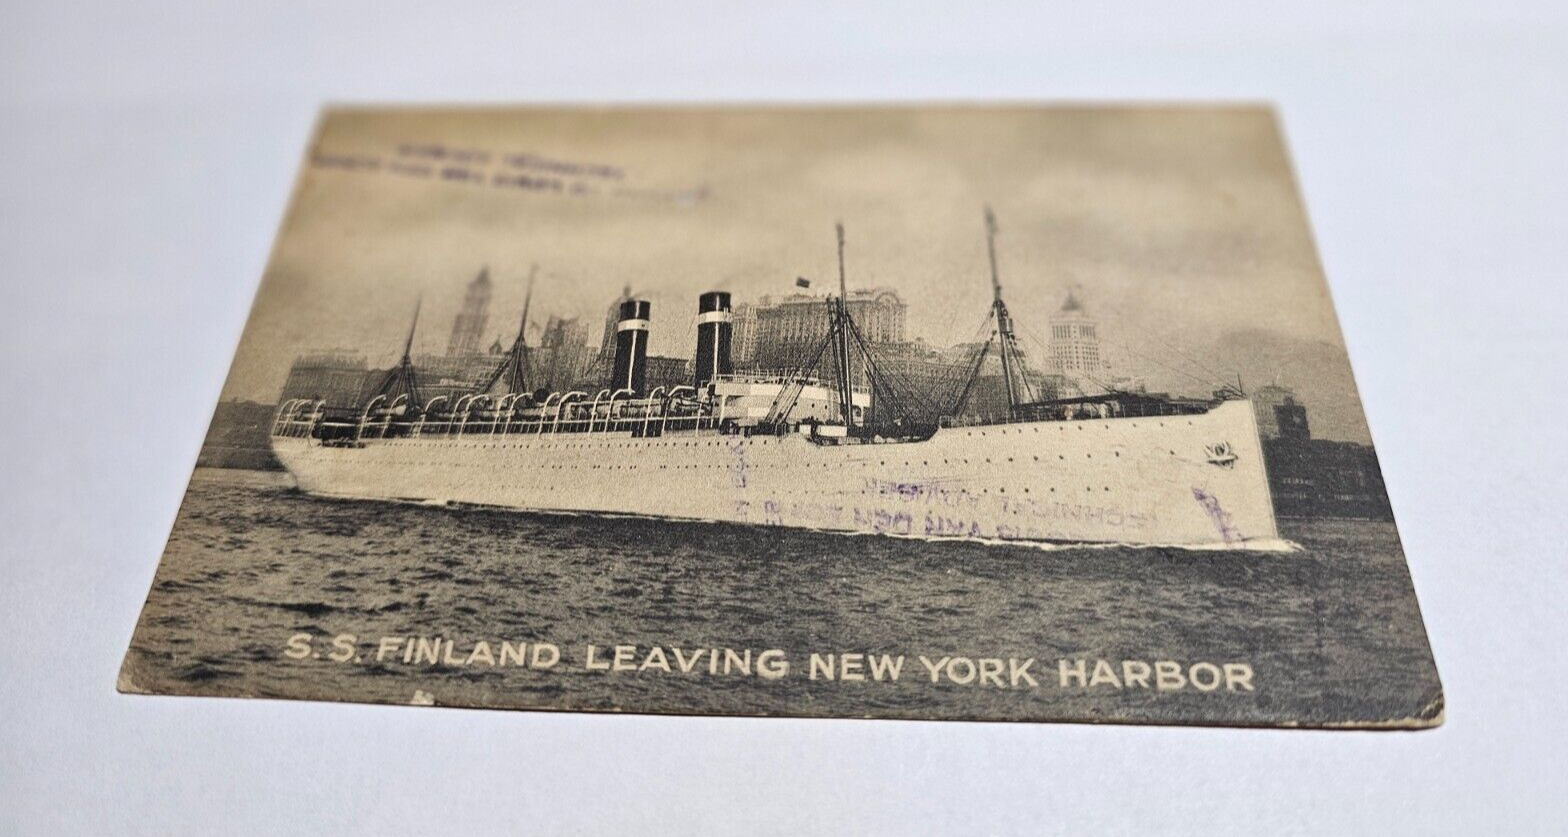 c.1920 S.S. FINLAND SHIP LEAVING NEW YORK HARBOR PANAMA PACIFIC LINE CANAL SS